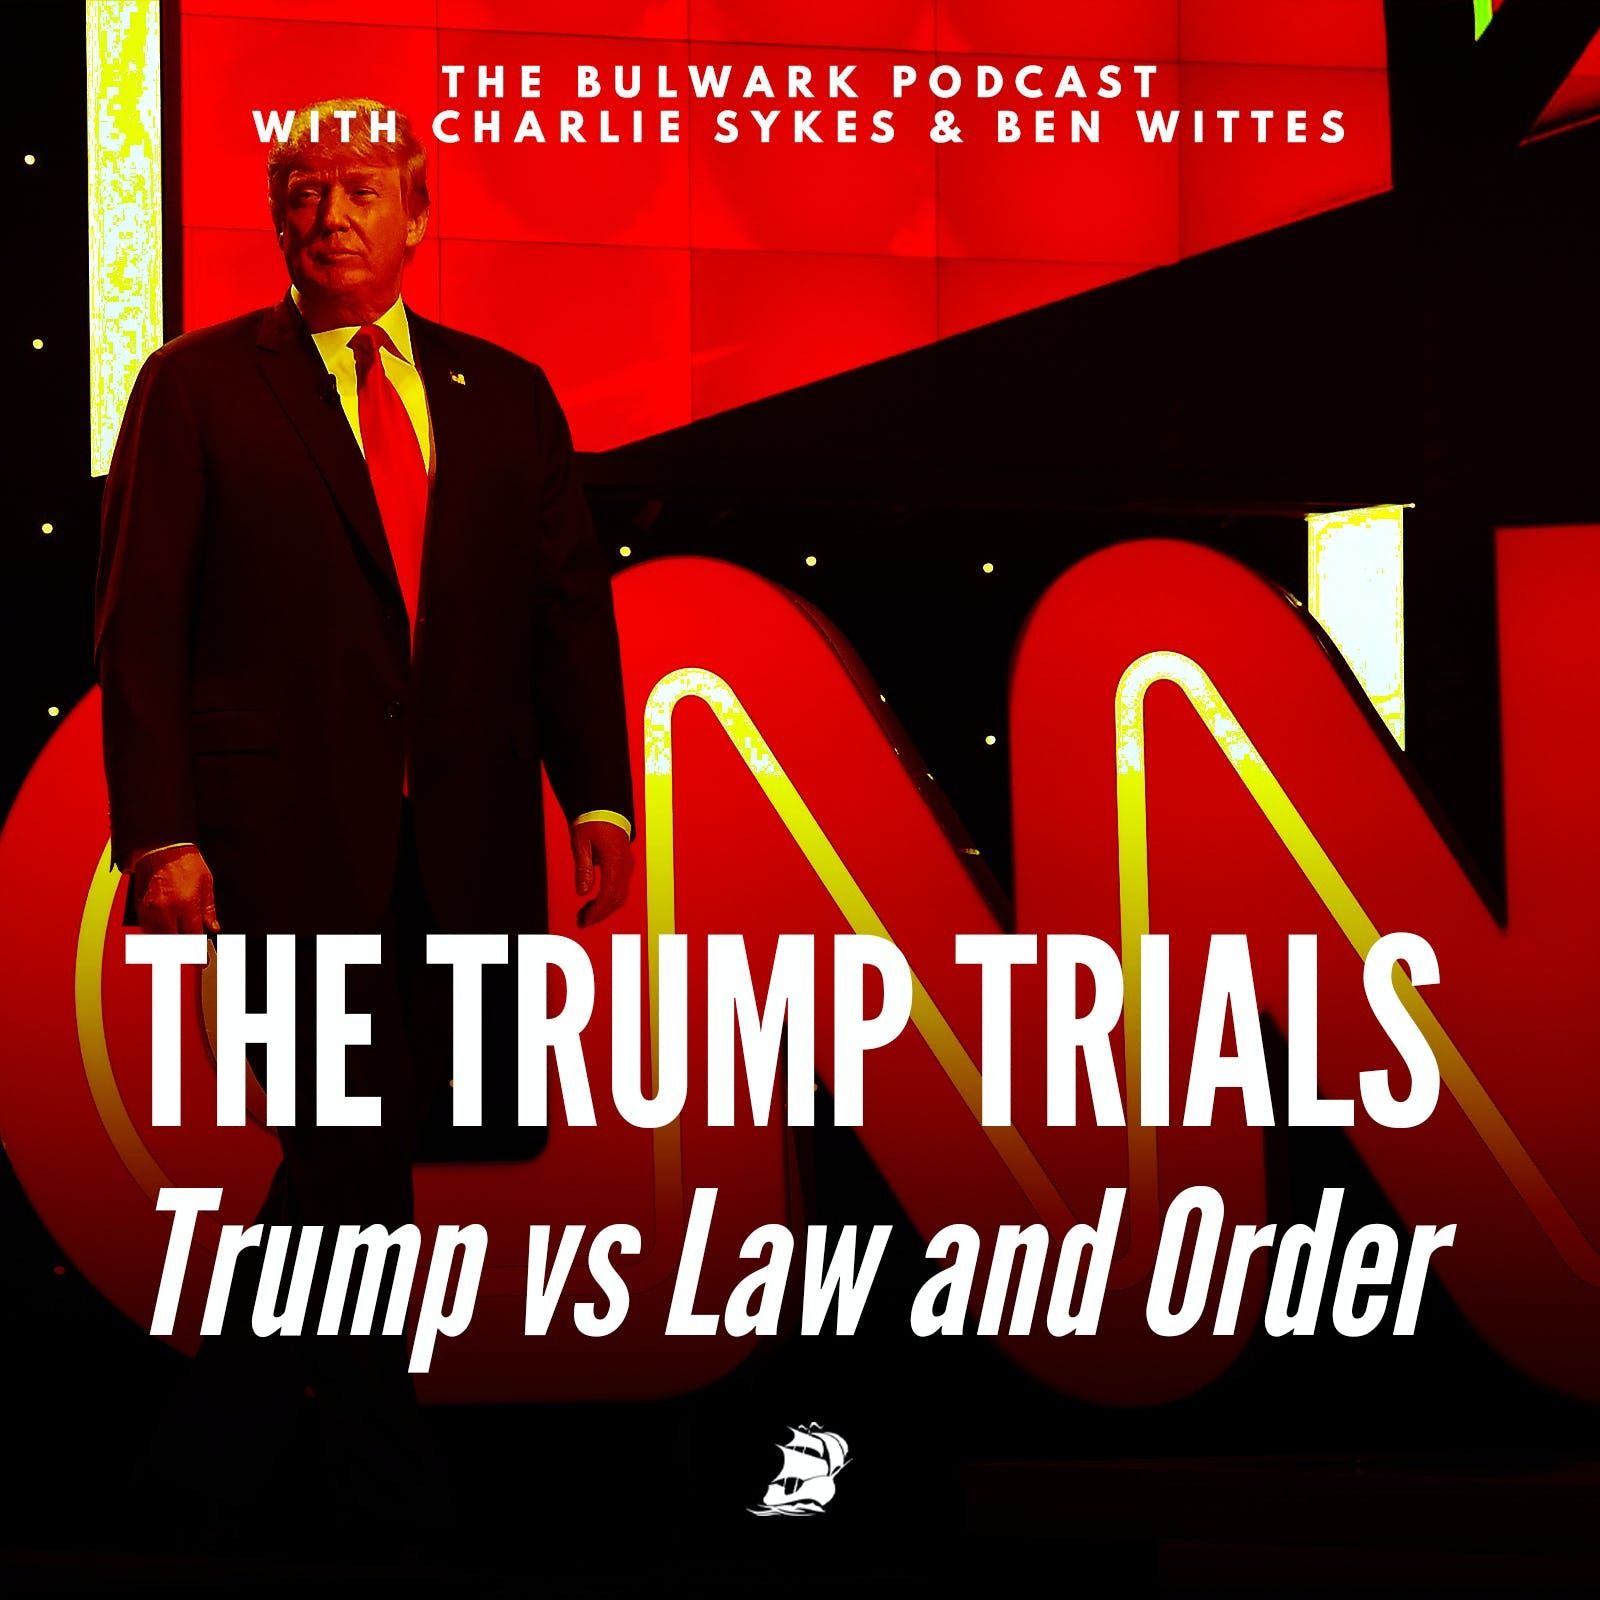 Trump vs Law and Order by The Bulwark Podcast